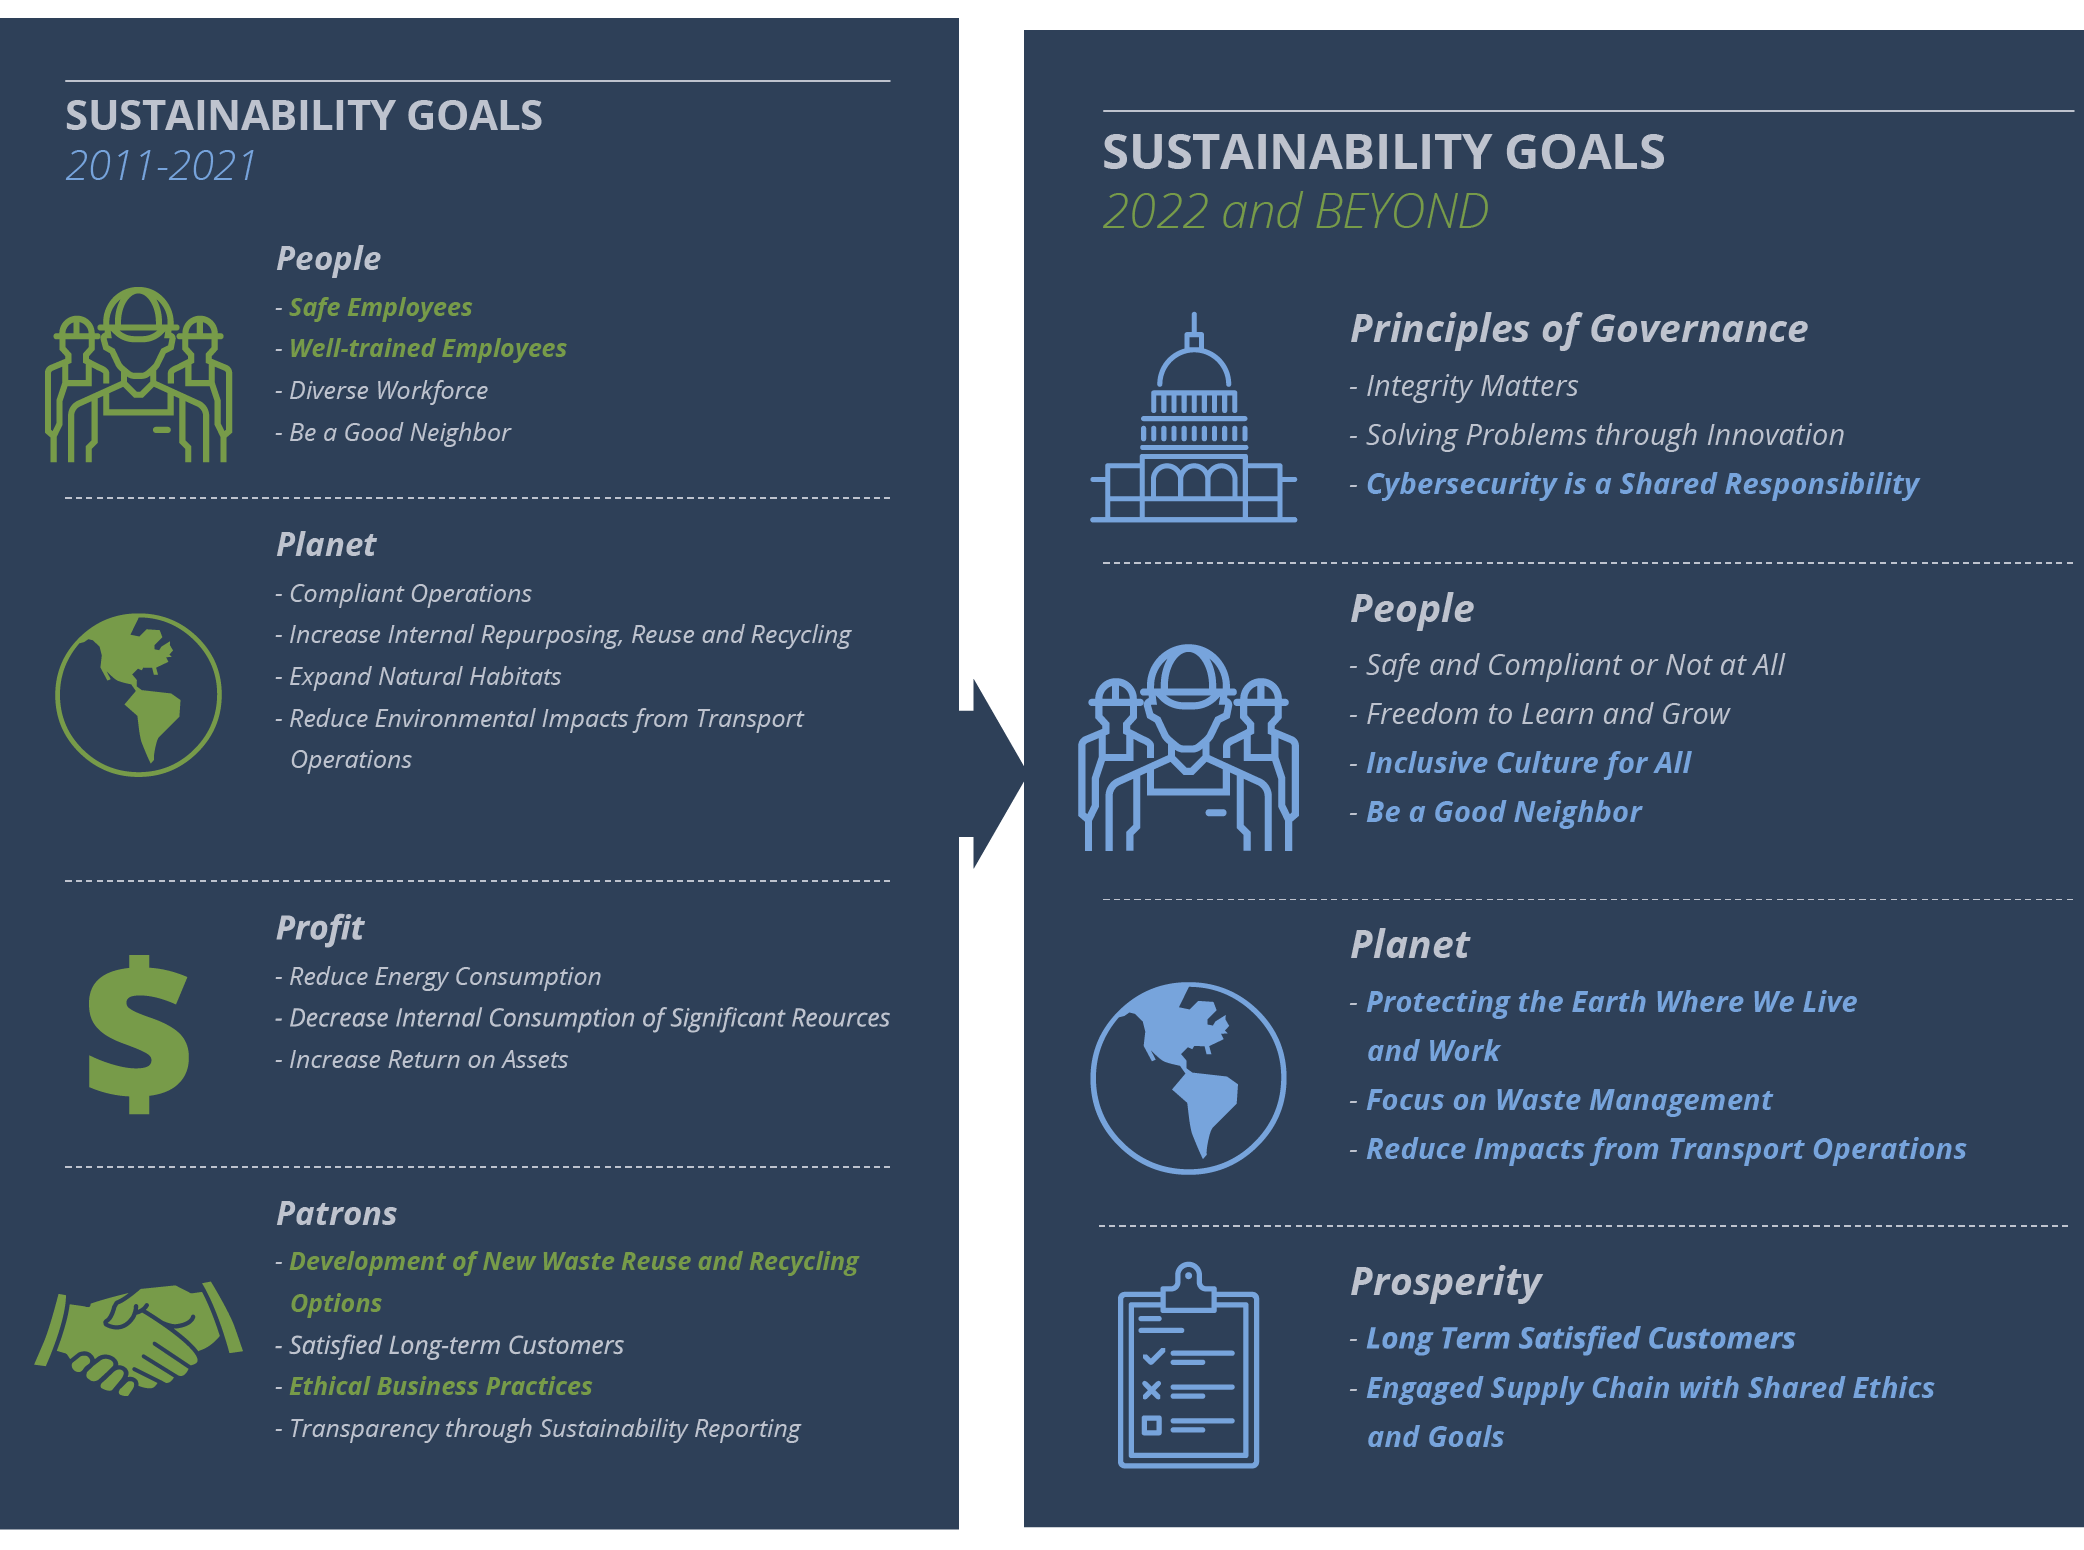 https://www.heritagewastesolutions.com/wp-content/uploads/2022/05/Sustainability-Goals-01.png